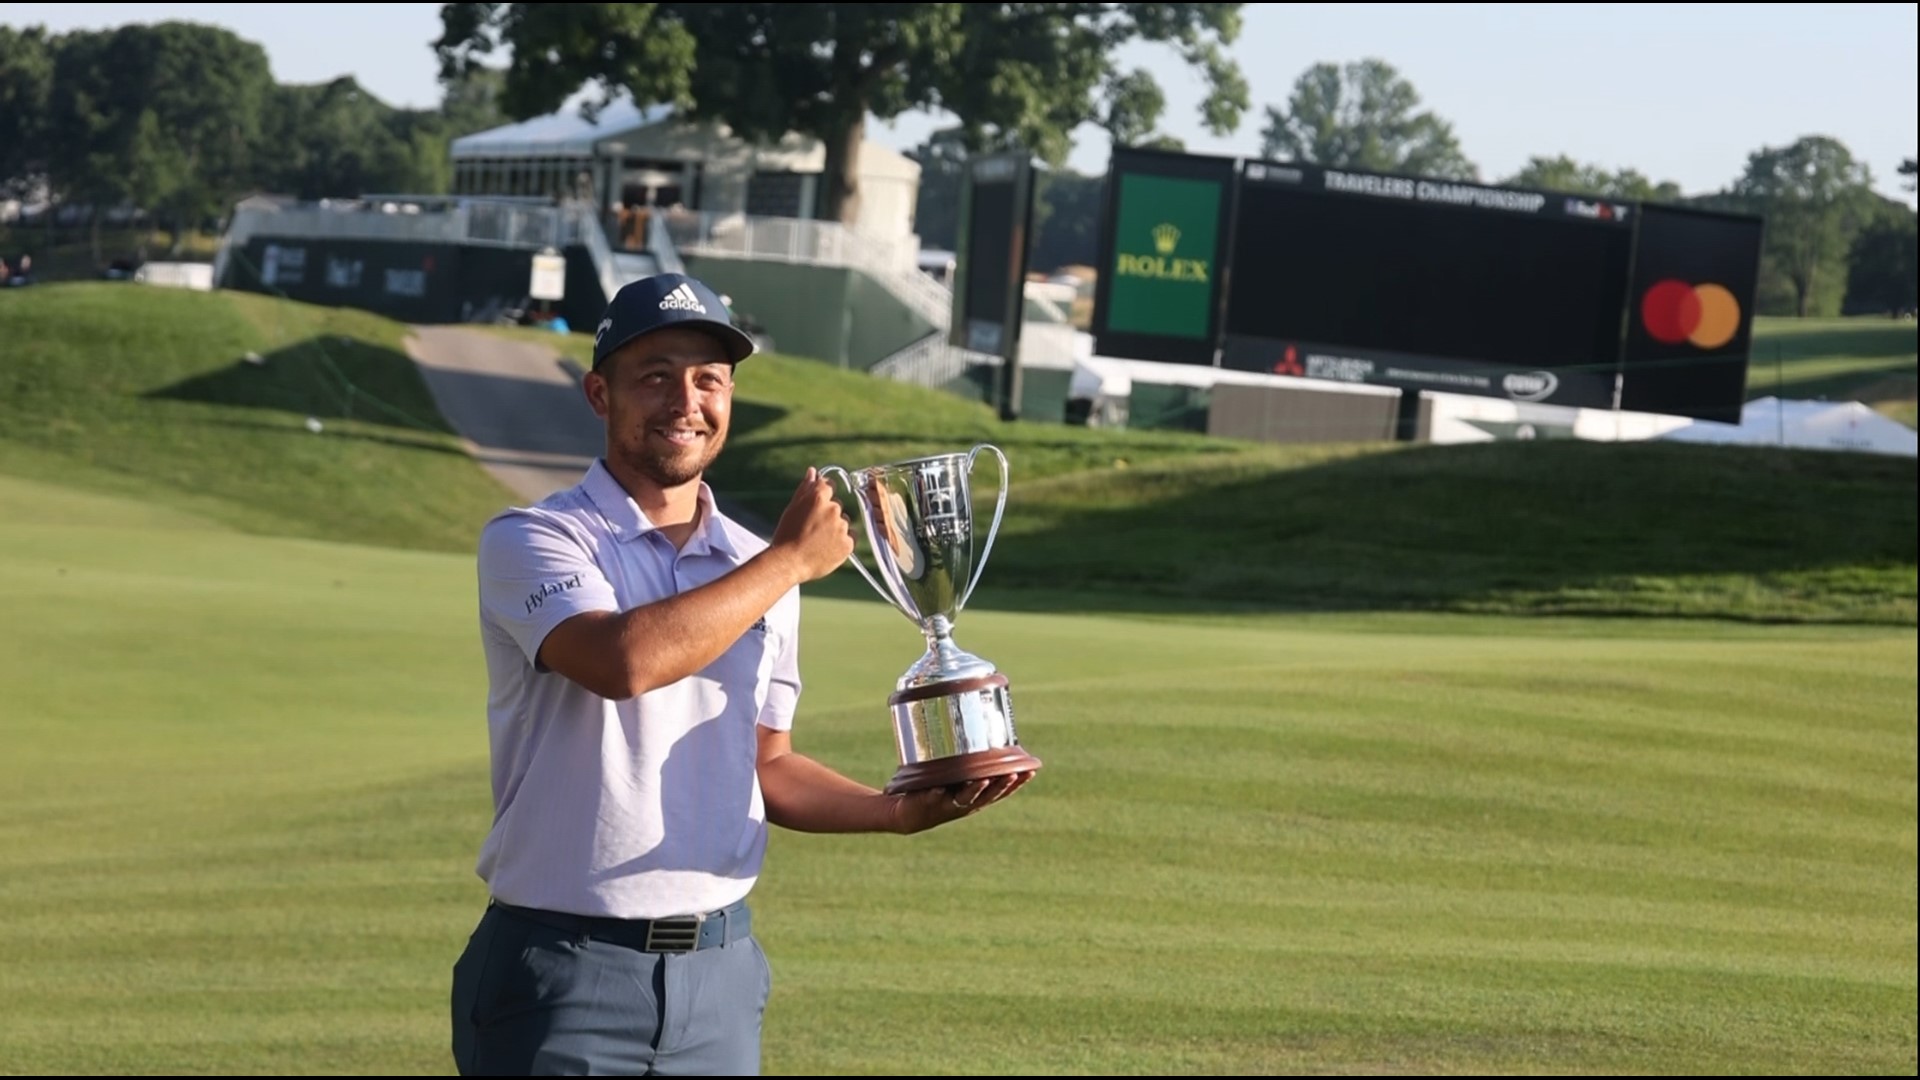 Schauffele has won the Ryder Cup and a Gold Medal on top of this Travelers Championship in 2022. This was Schauffele's first PGA victory since 2019.